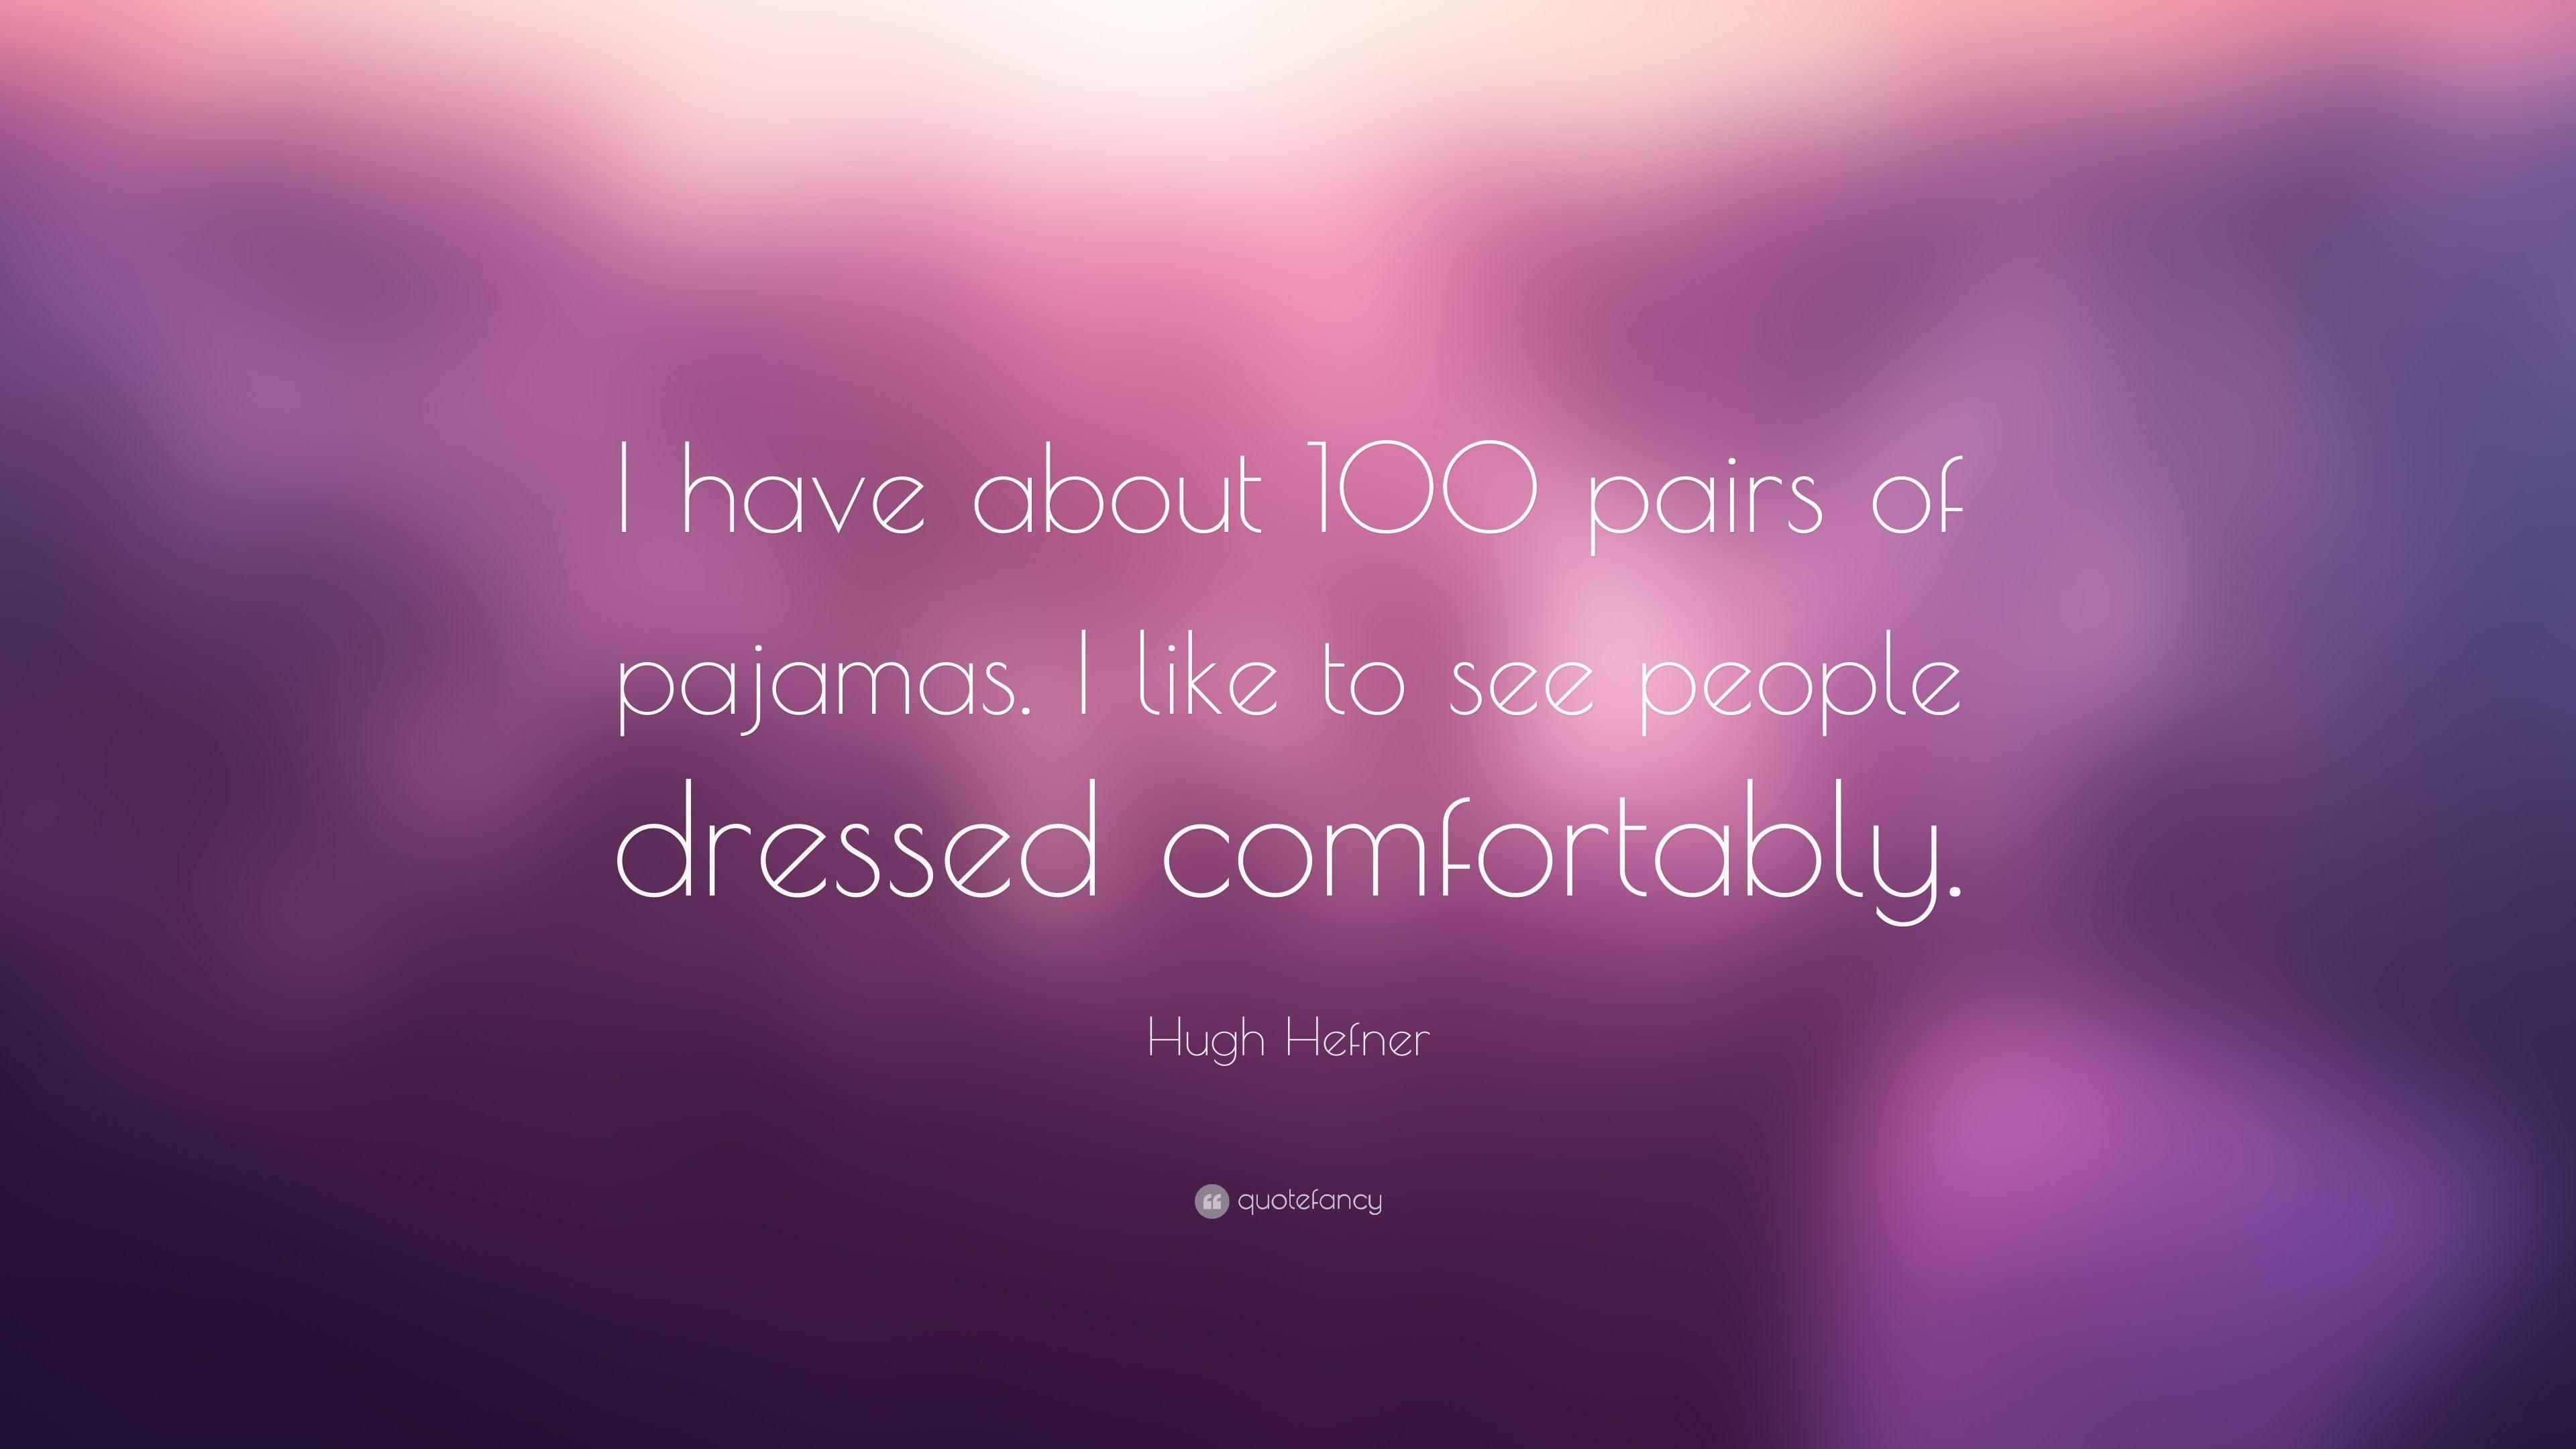 Hugh Hefner Quote: “I have about 100 pairs of pajamas. I